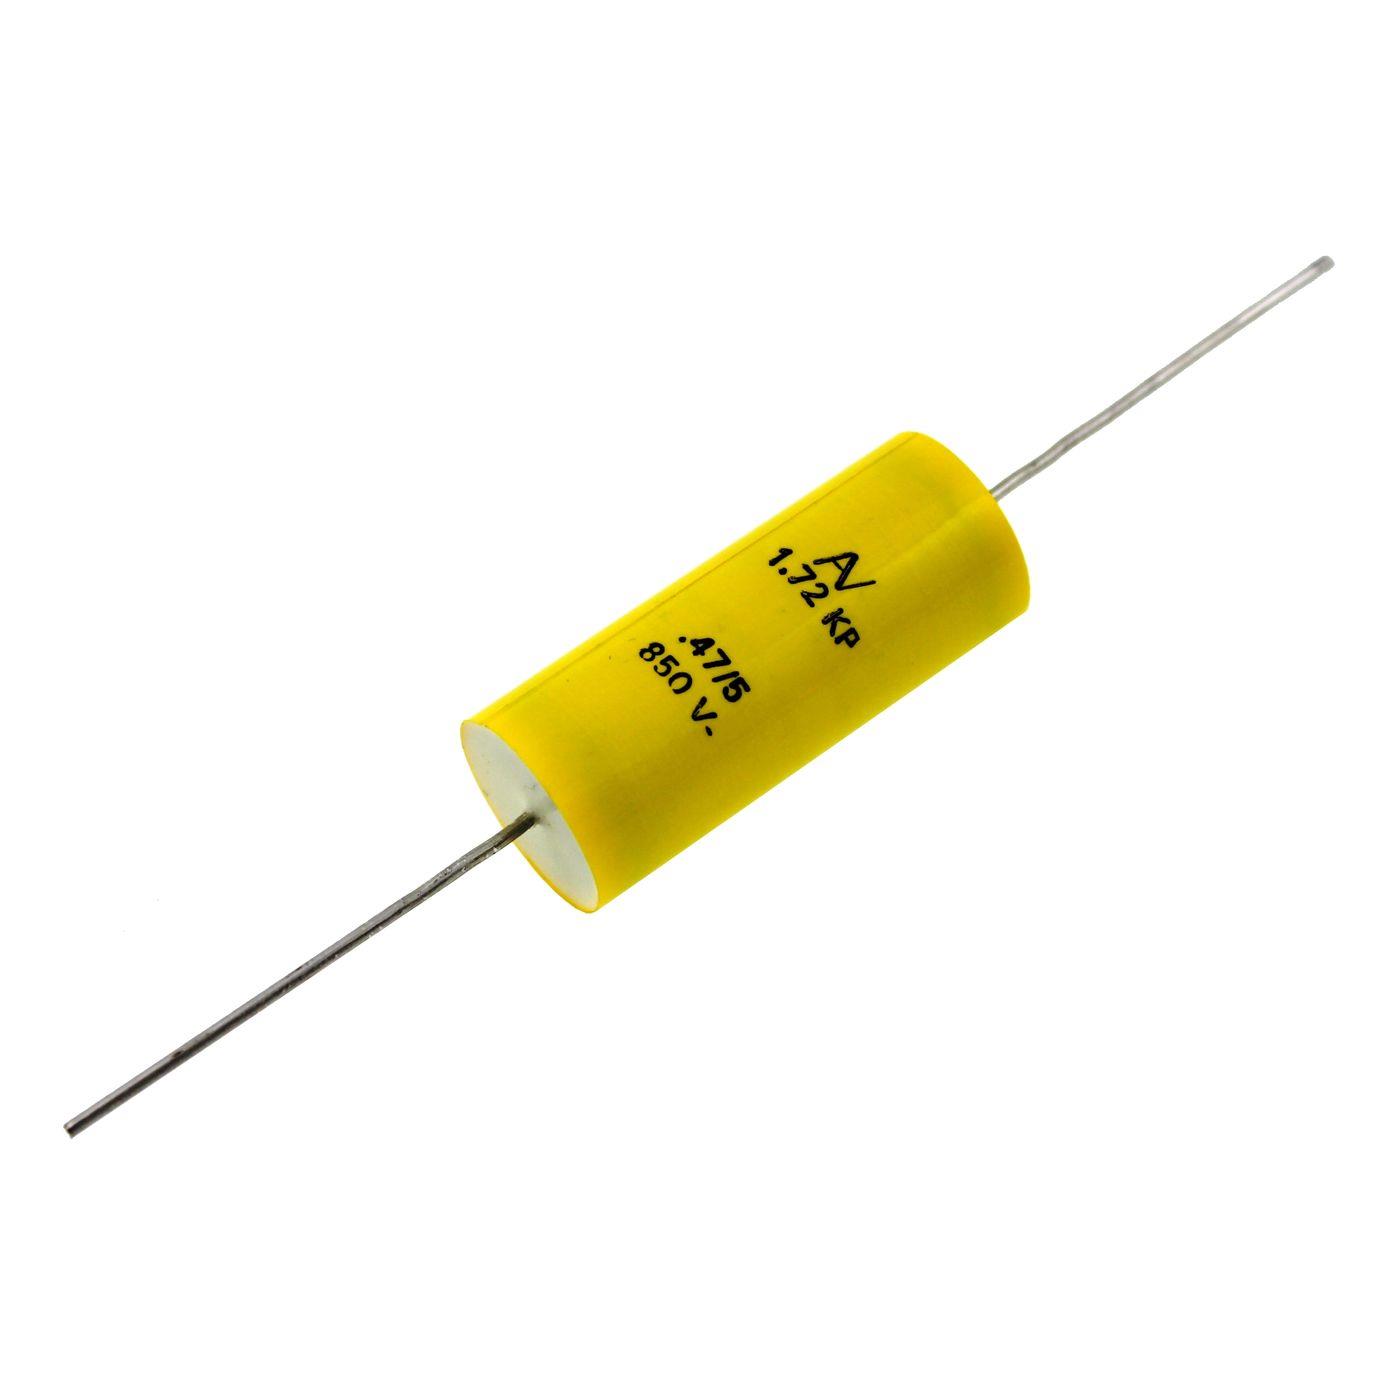 KP Foil Capacitor Axially 0,47µF 850V DC Arcotronics A72ZX3470ZA00J 470nF